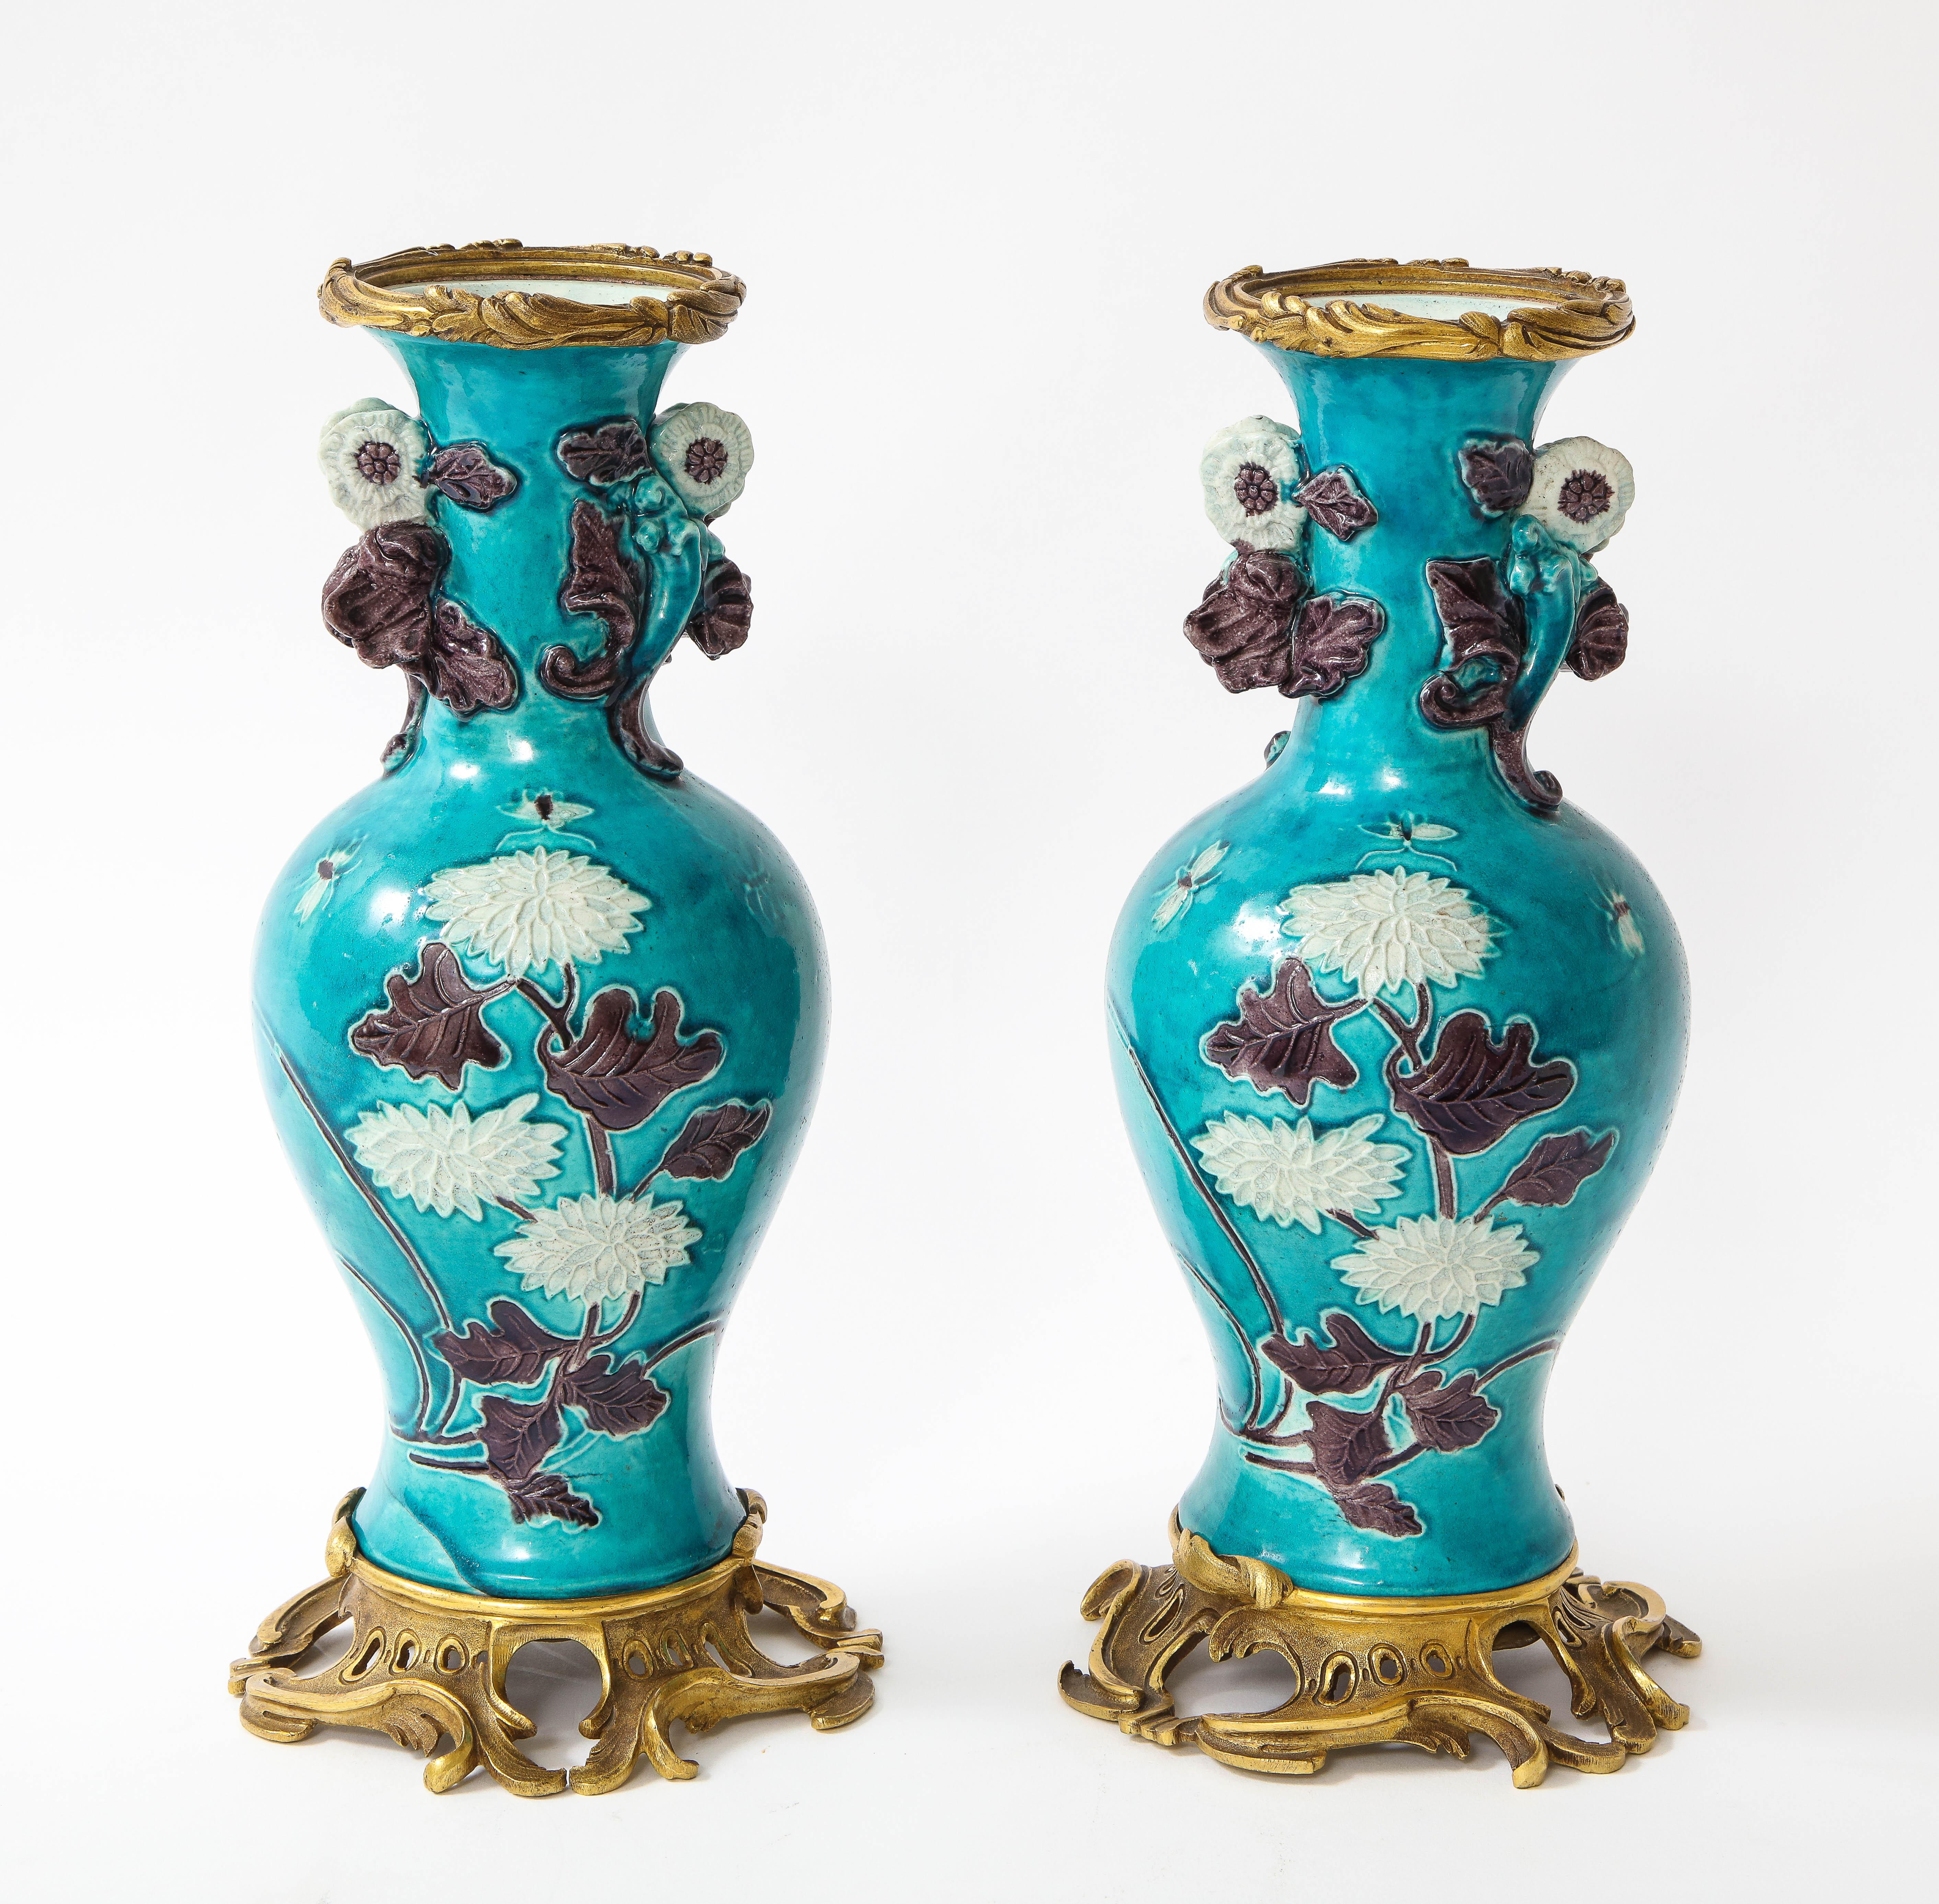 An incredible pair of Louis XVI style 18th century Chinese porcelain vases with 19th century French doré bronze mounts. The porcelain was made in china in the 1700s. The vase is of turquoise ground with dark hand-enamelled purple and white